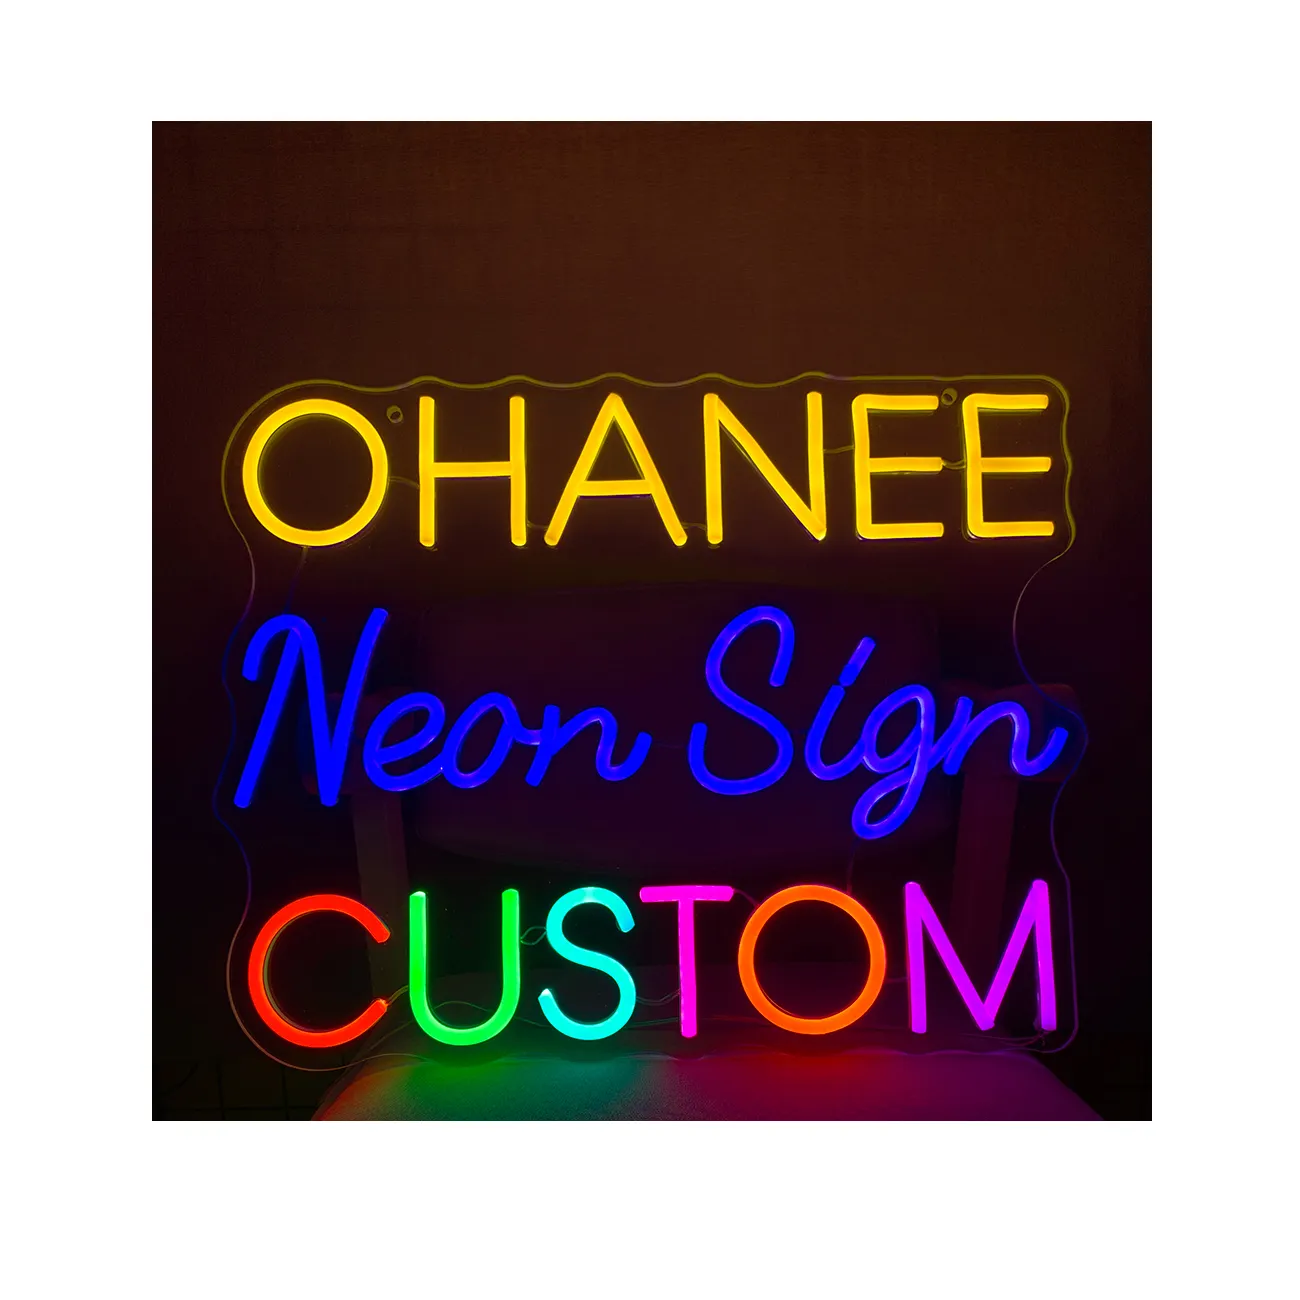 Custom Creative Outdoor Led French Fries Fried chicken Shopacrylic Led Sign Advertising Boards Decor Shop Led Light